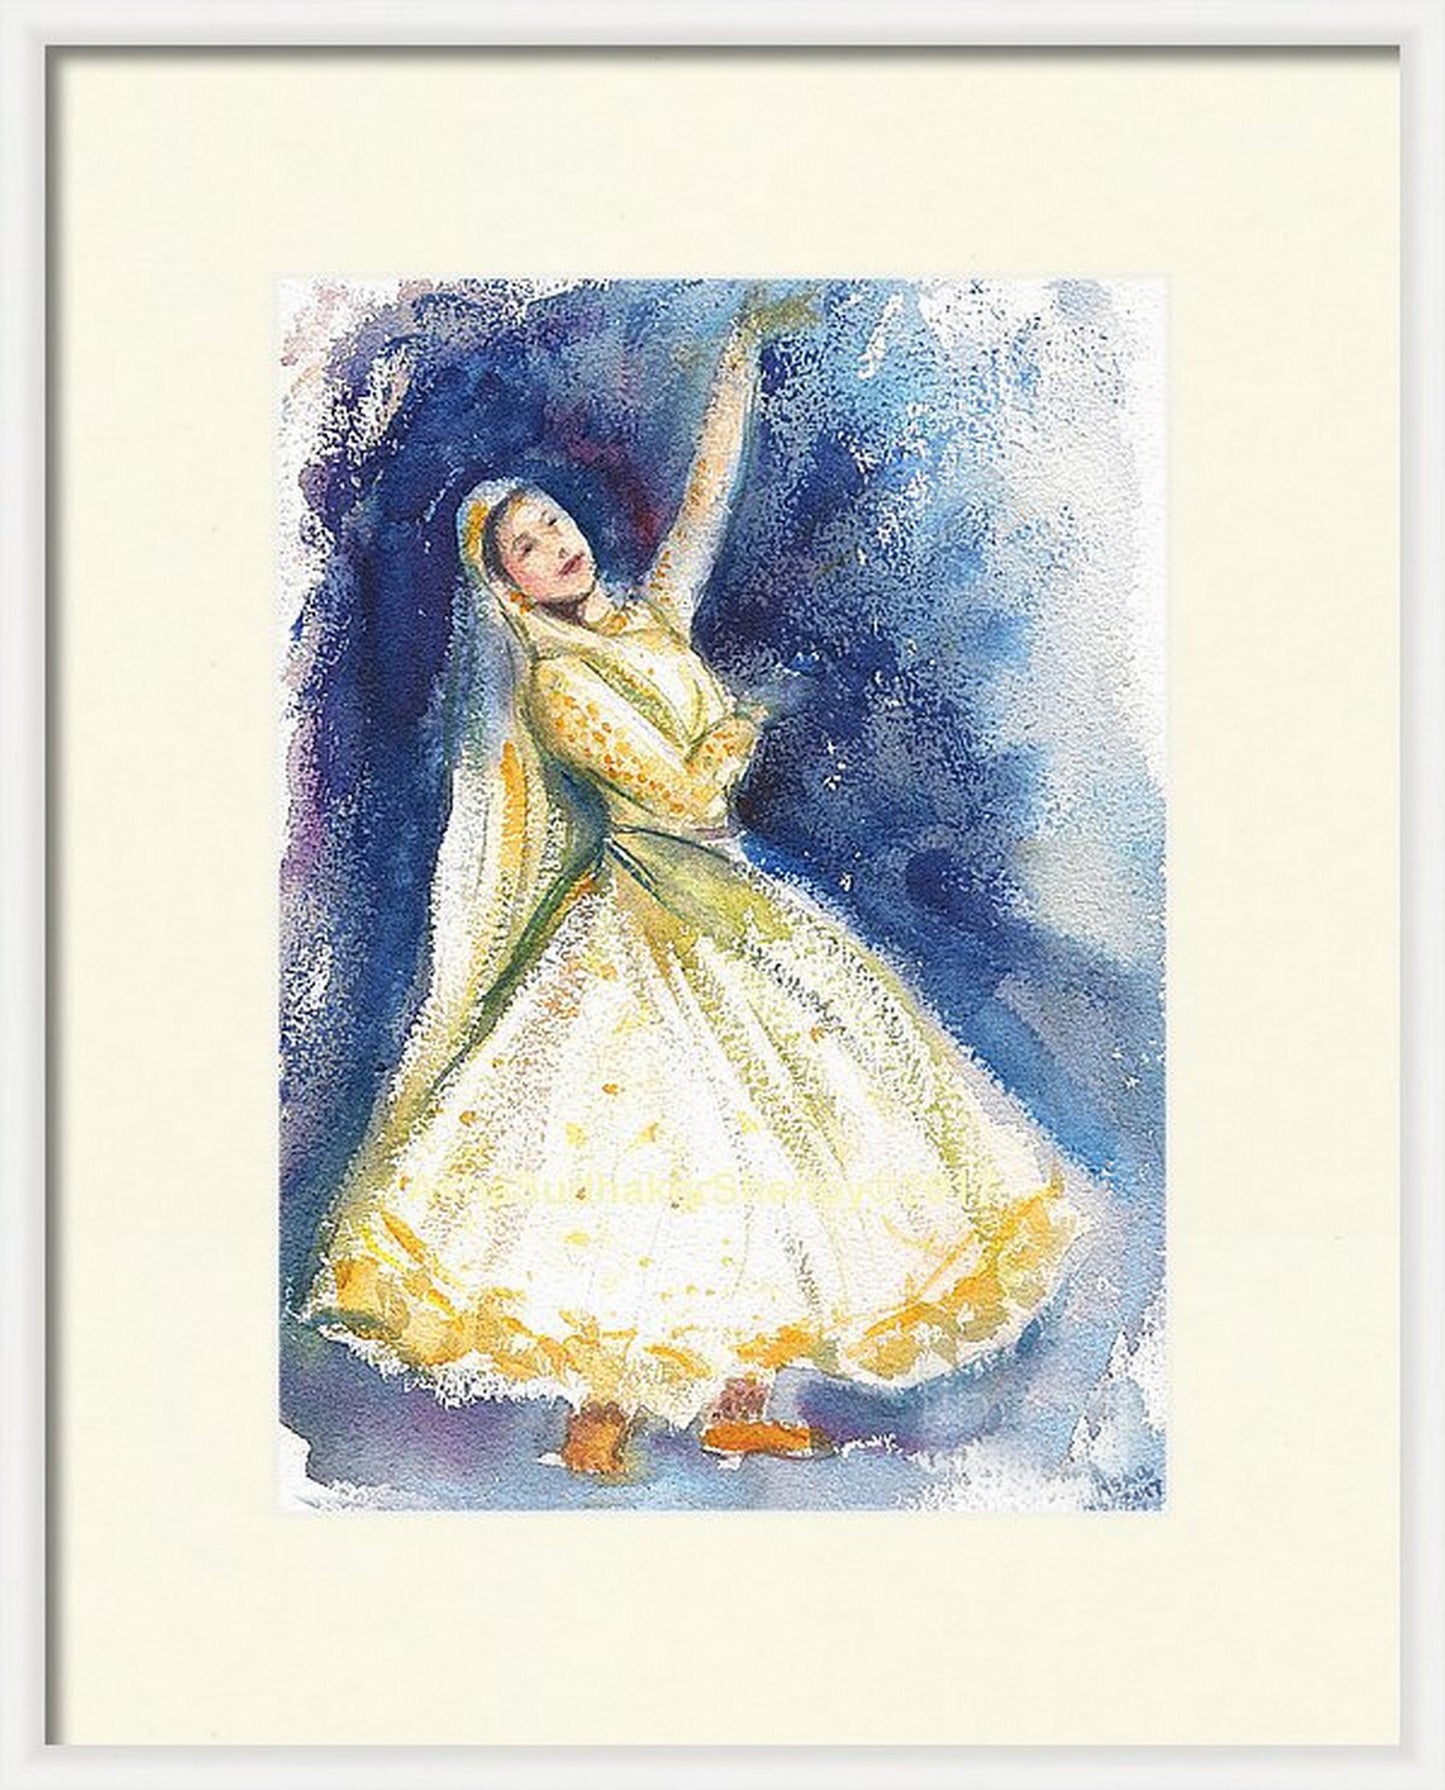 In a virtual frame, Indian Kathak Dancer 2, watercolor painting